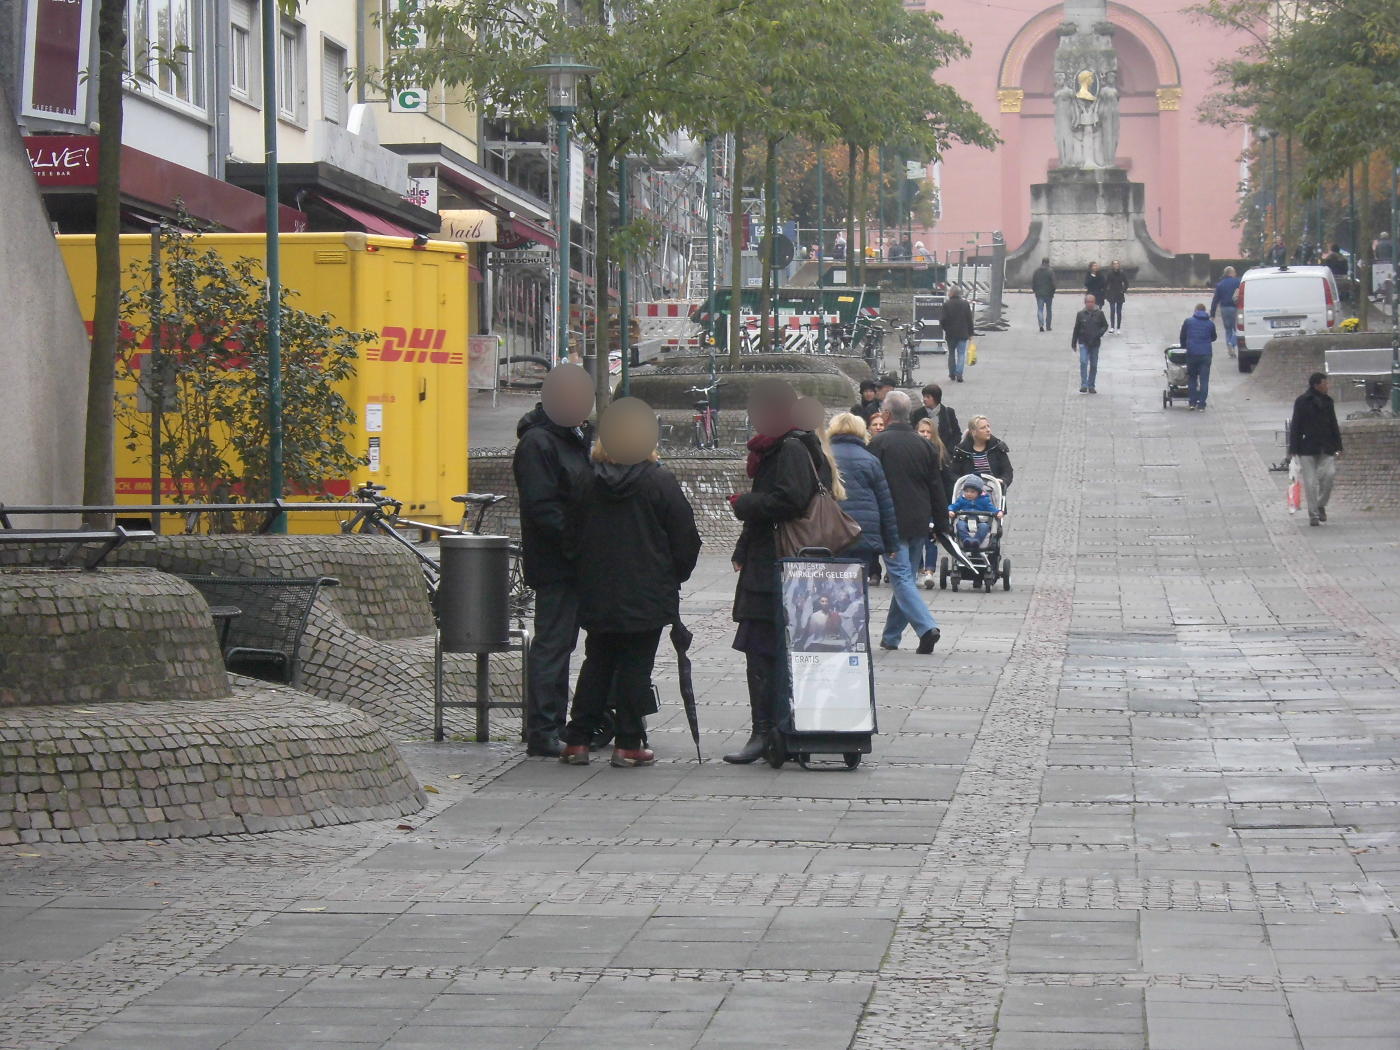 Jehovah's Witnesses in Darmstadt and a Muslim